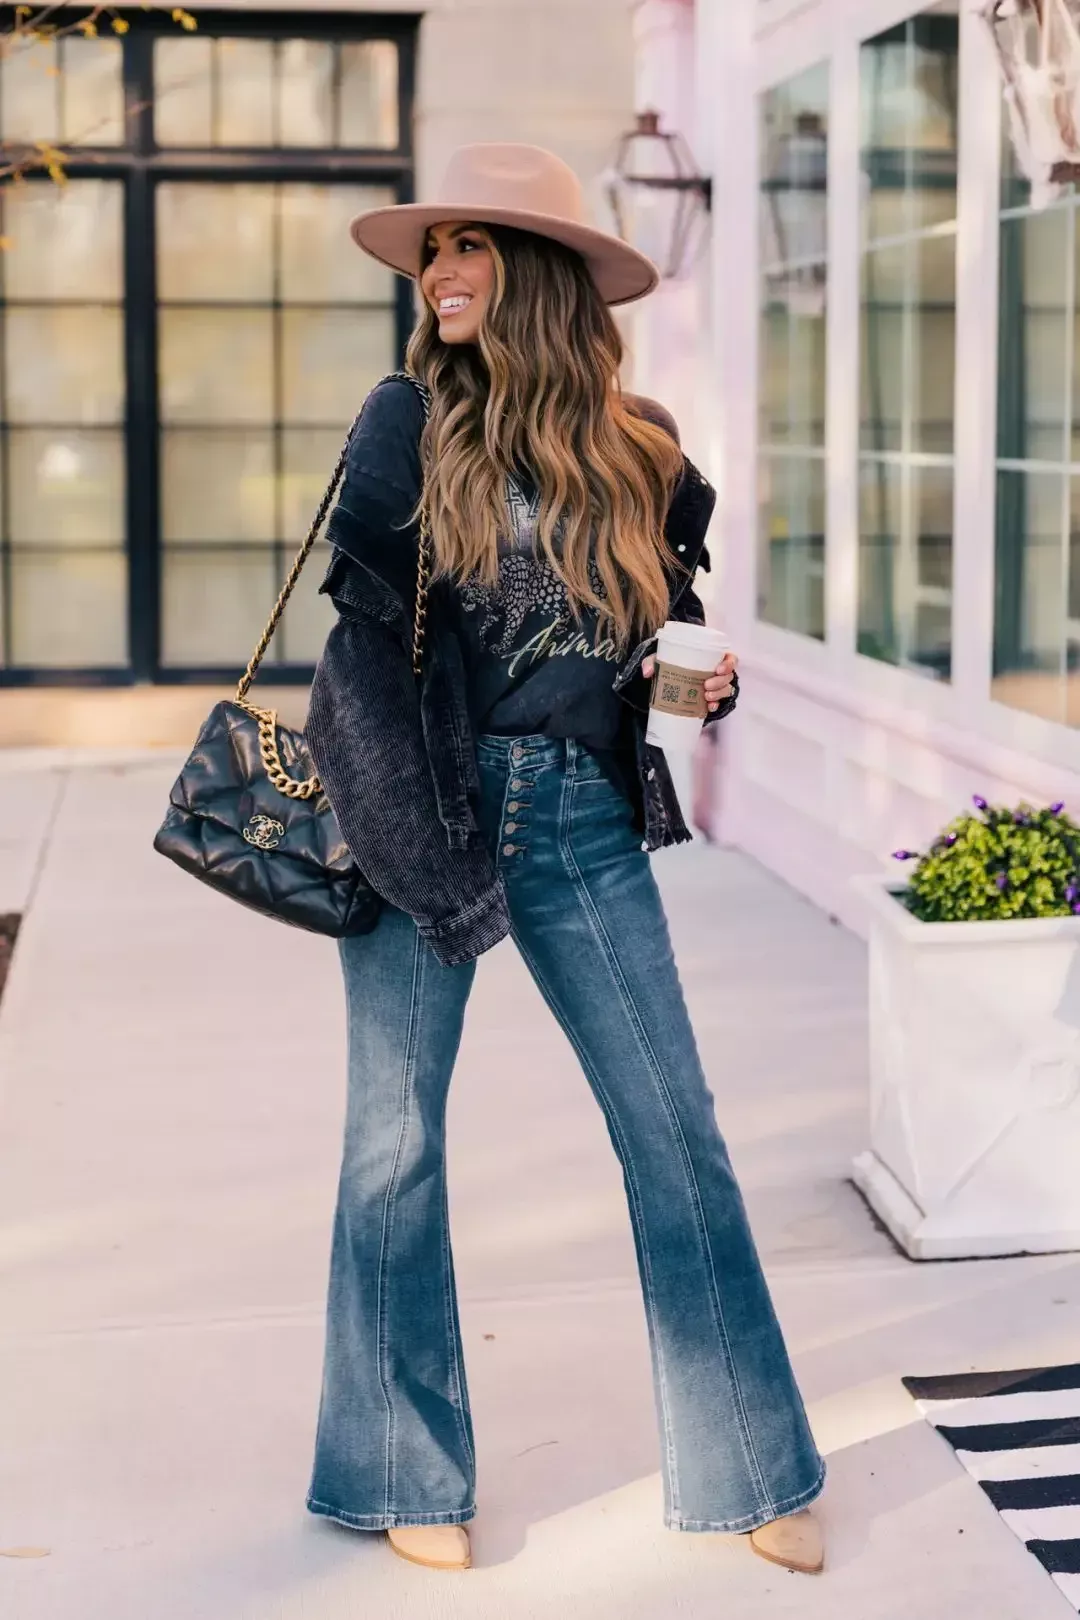 Bell Bottom Jeans Outfit Ideas
  for Women